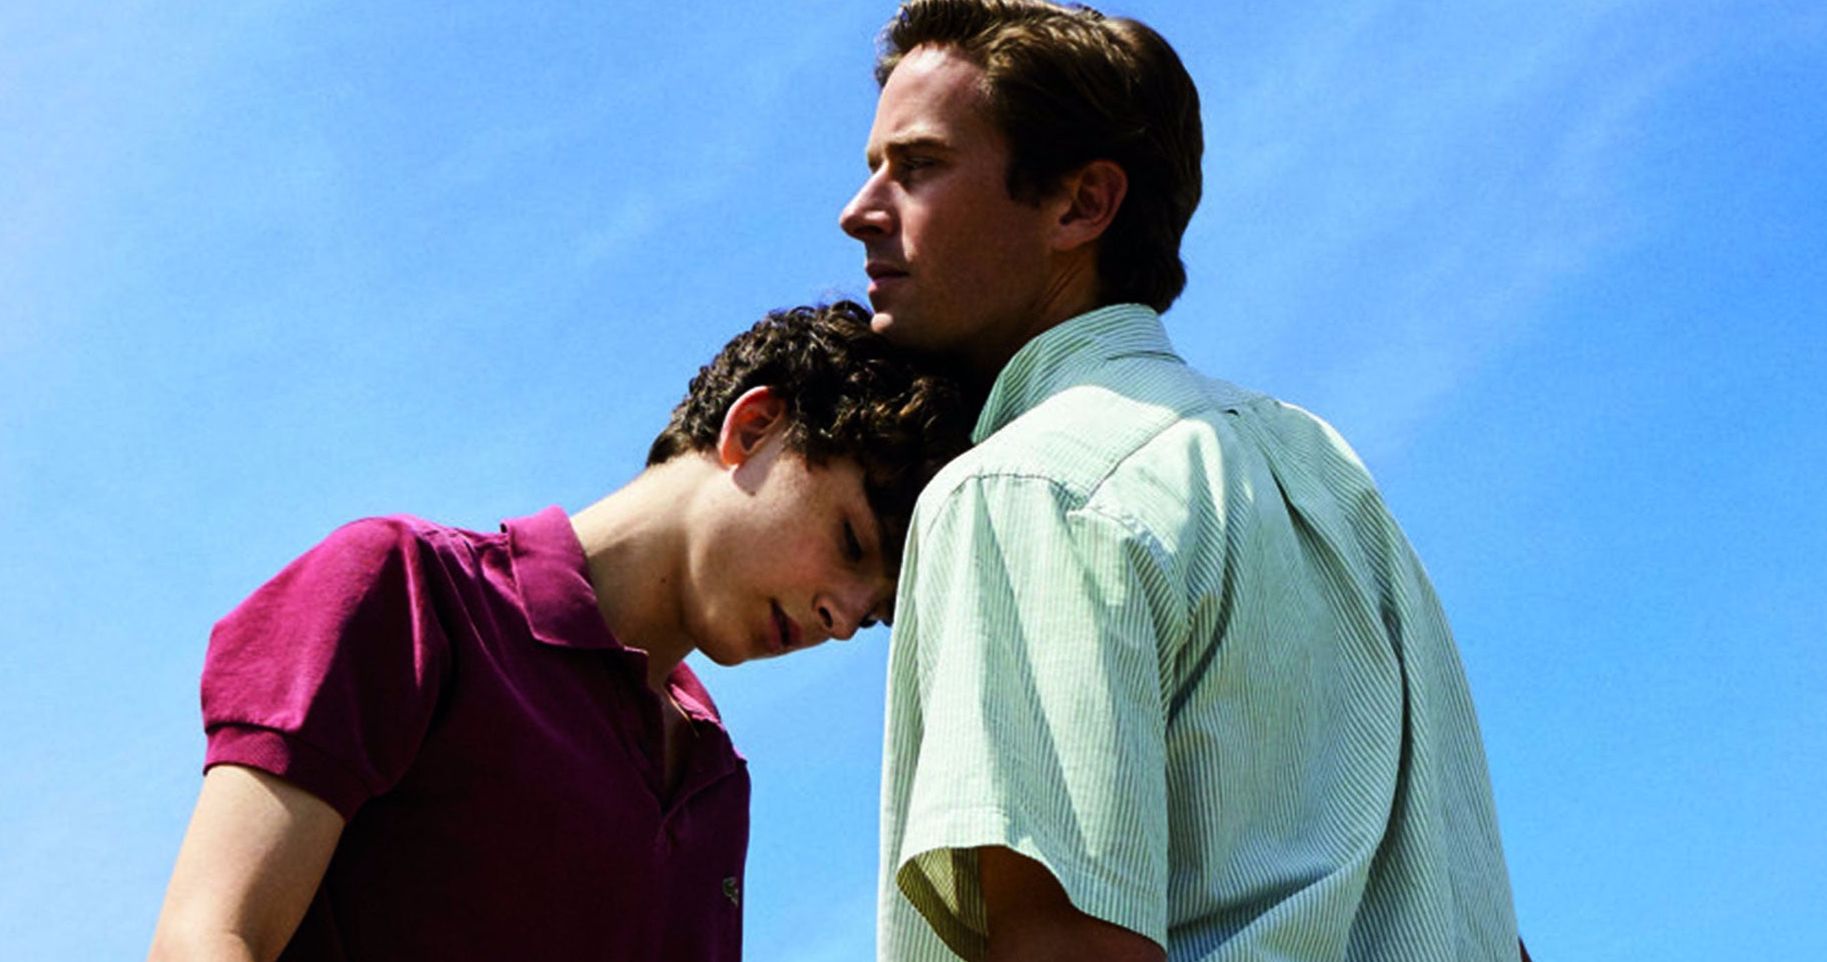 Timothee Chalamet and Armie Hammer Confirmed to Return in Call Me by Your Name 2